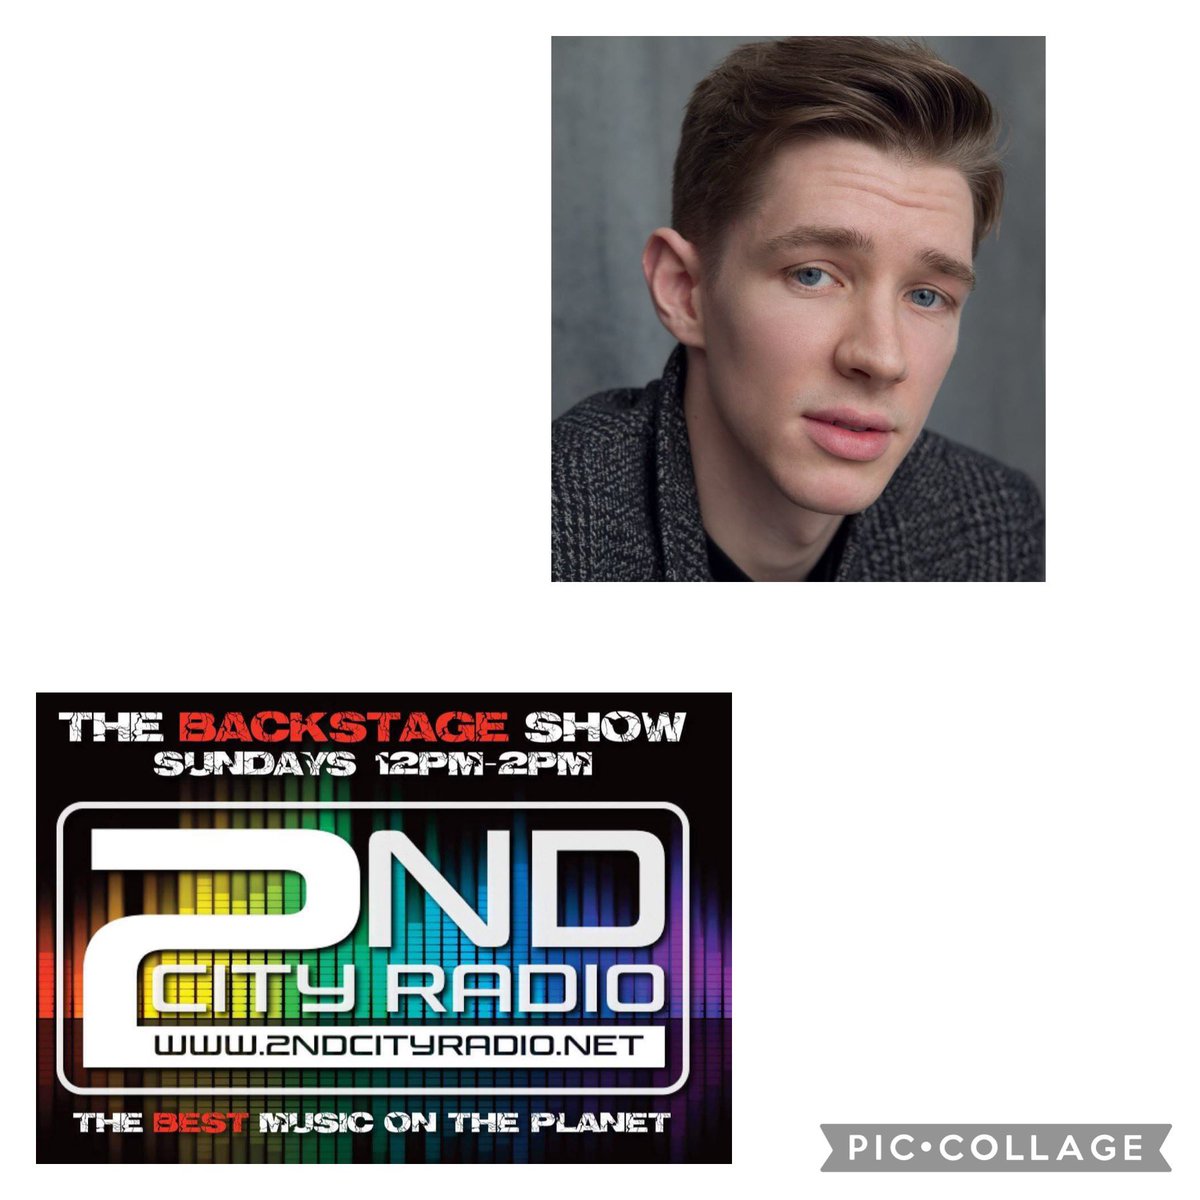 Surely one of the biggest shows in the West End at the moment is @SkysEdgeMusical This weekend Samuel Jordan joins me #Backstage @SECONDCITYRADIO to talk about the show and his career. Tune in from midday on Sunday at 2ndcityradio.net #theatre @NationalTheatre